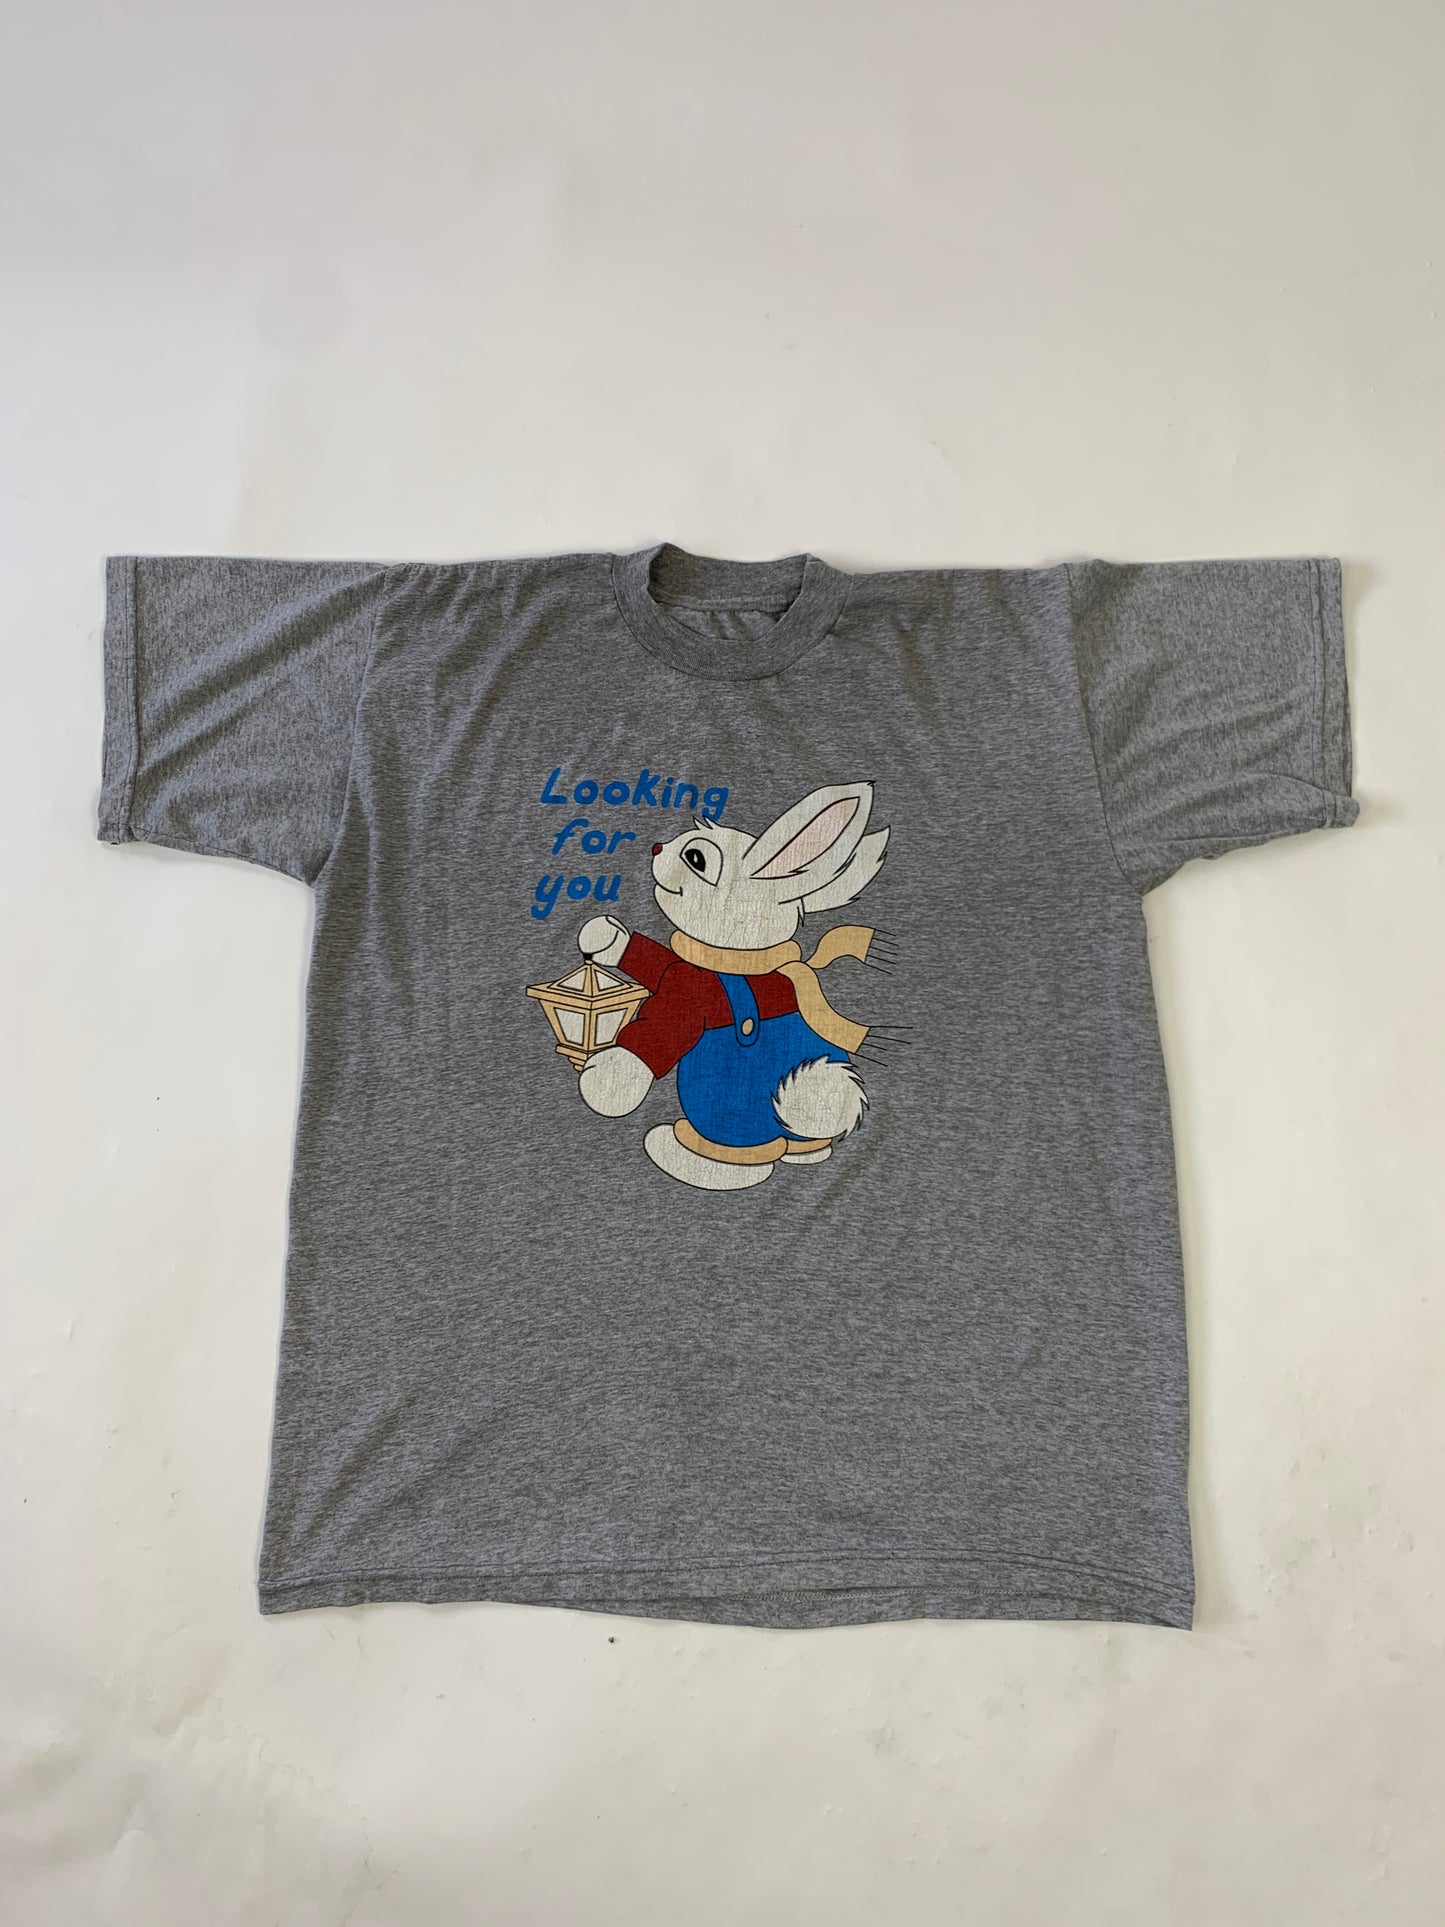 Looking for you Vintage T-Shirt - L